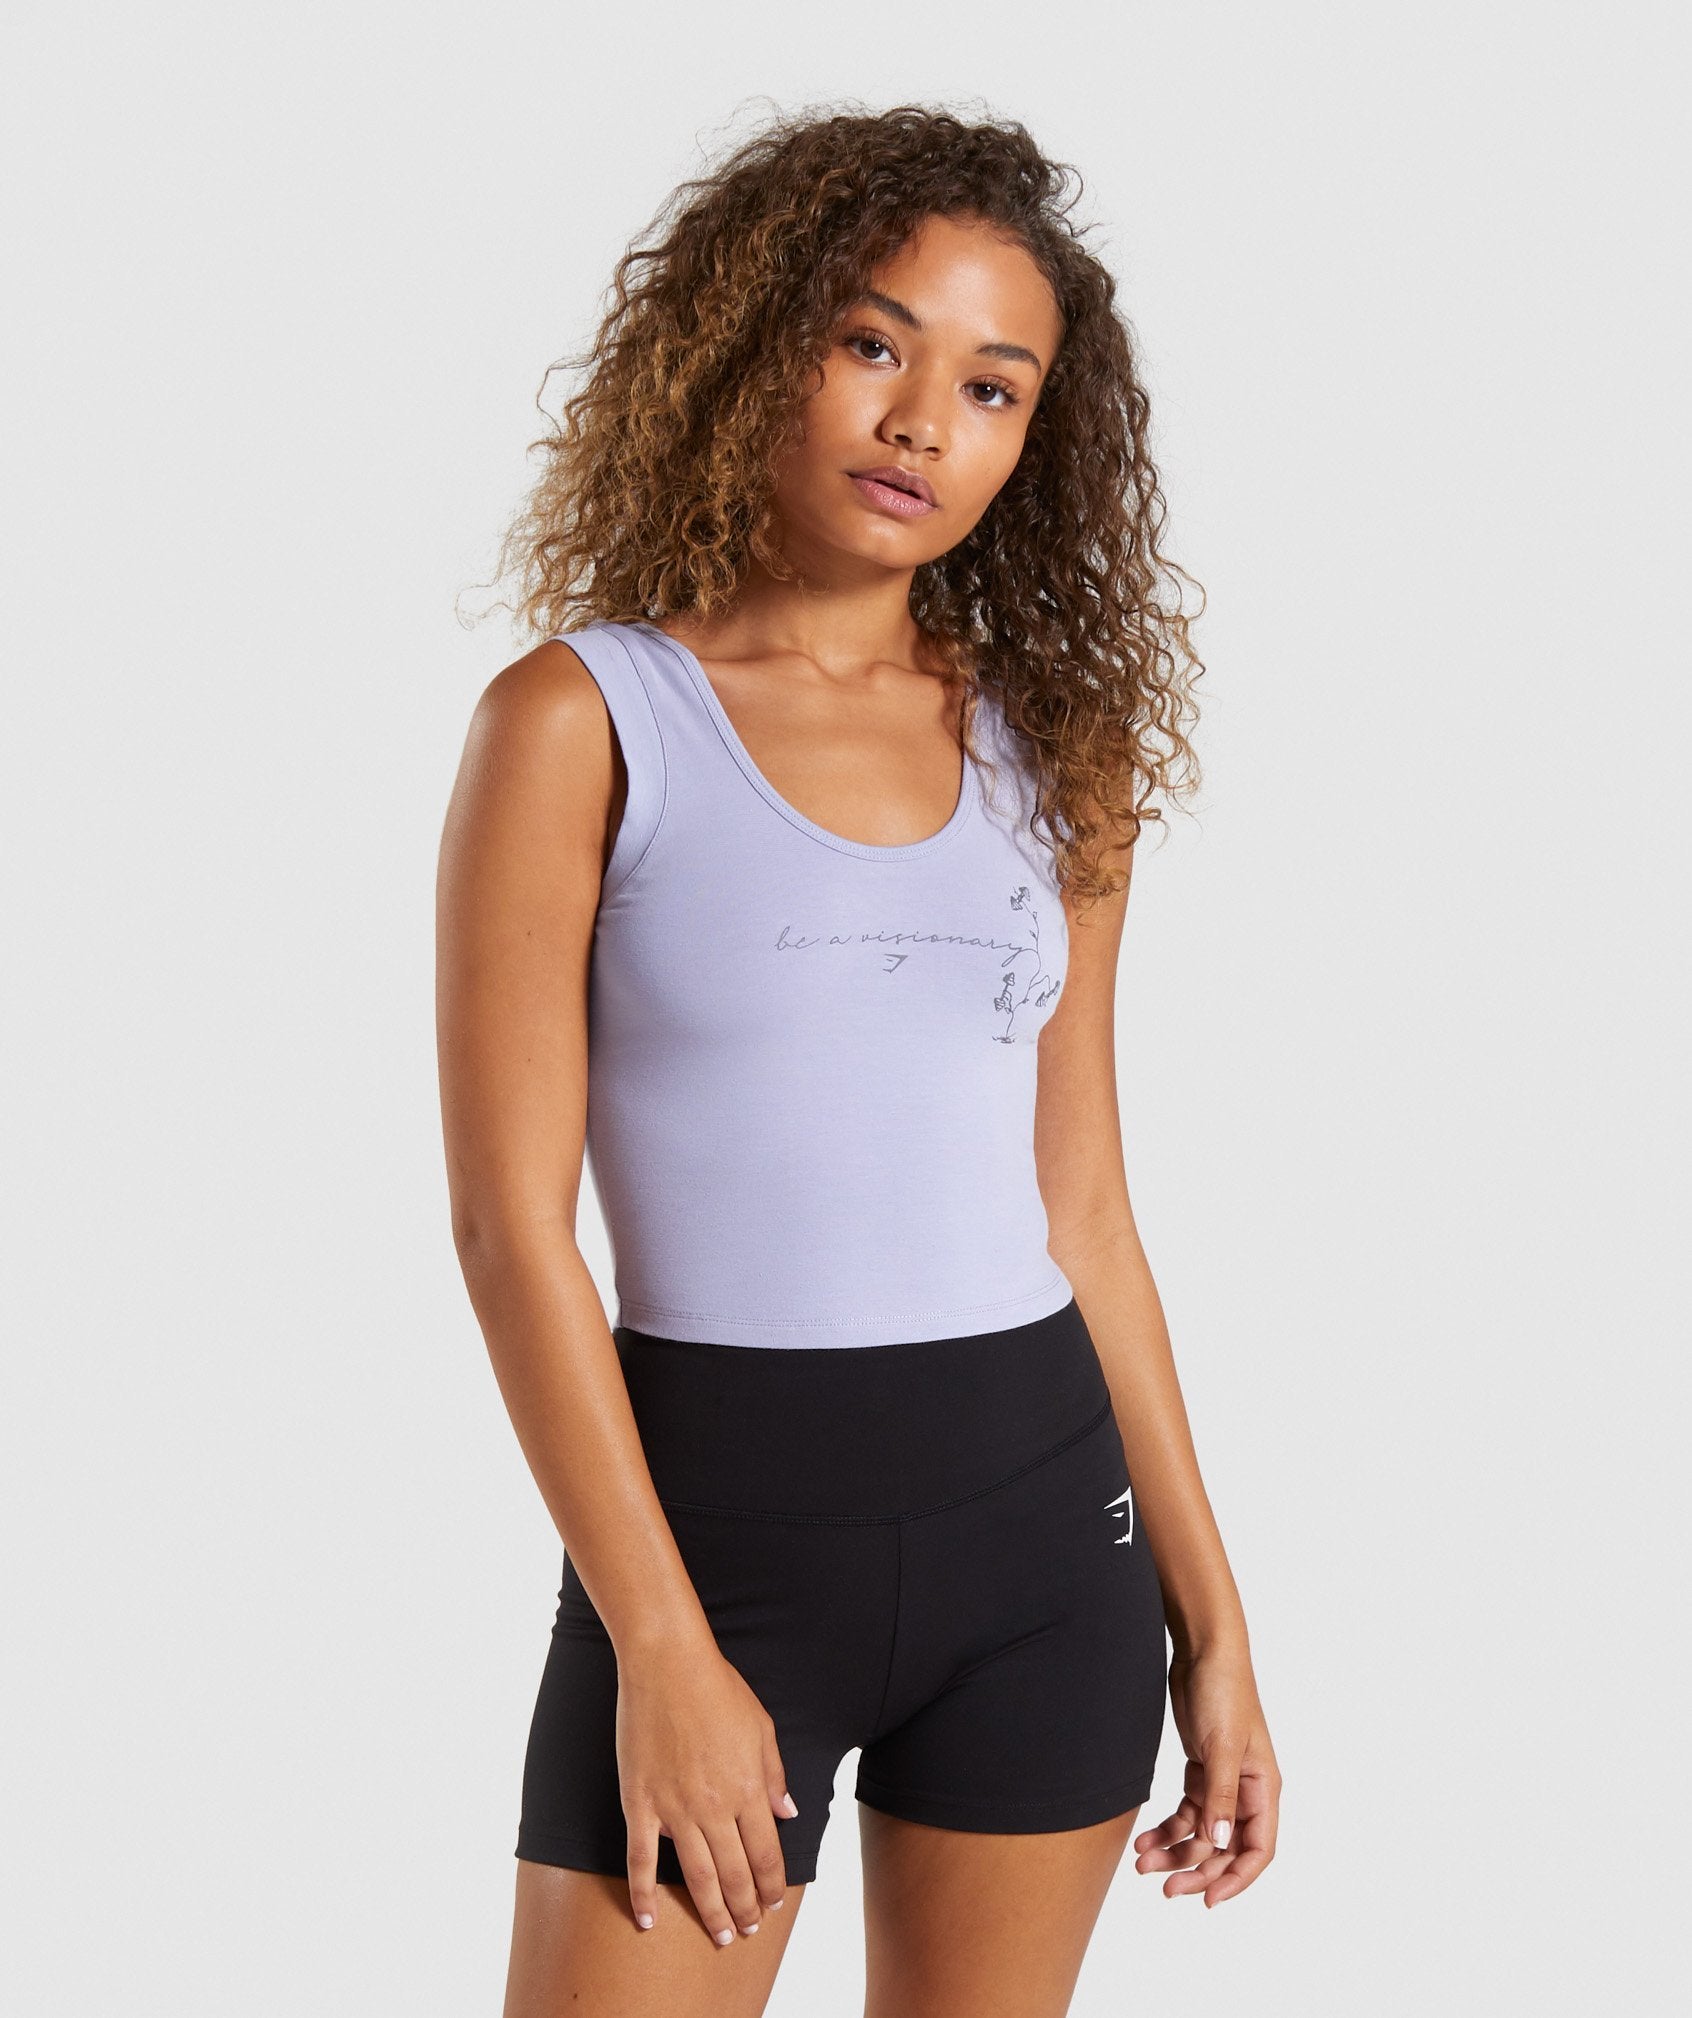 Roots Crop Top in Lavender - view 1